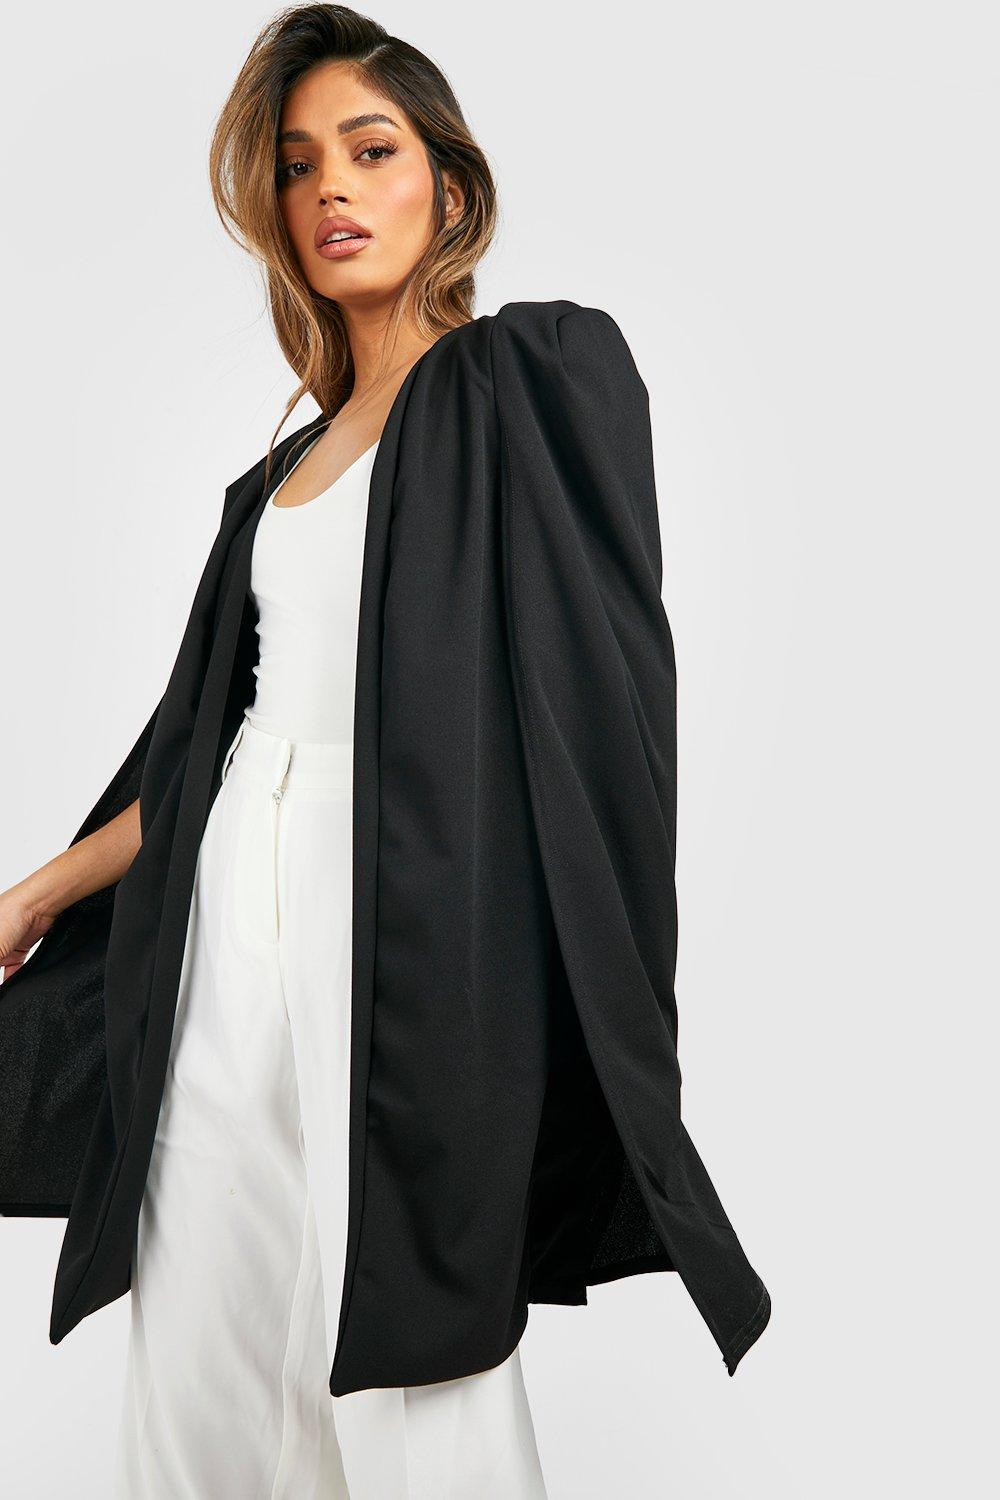 6 Boohoo Women Clothing Jackets Ponchos & Capes Womens Longline Tailored Crepe Cape 